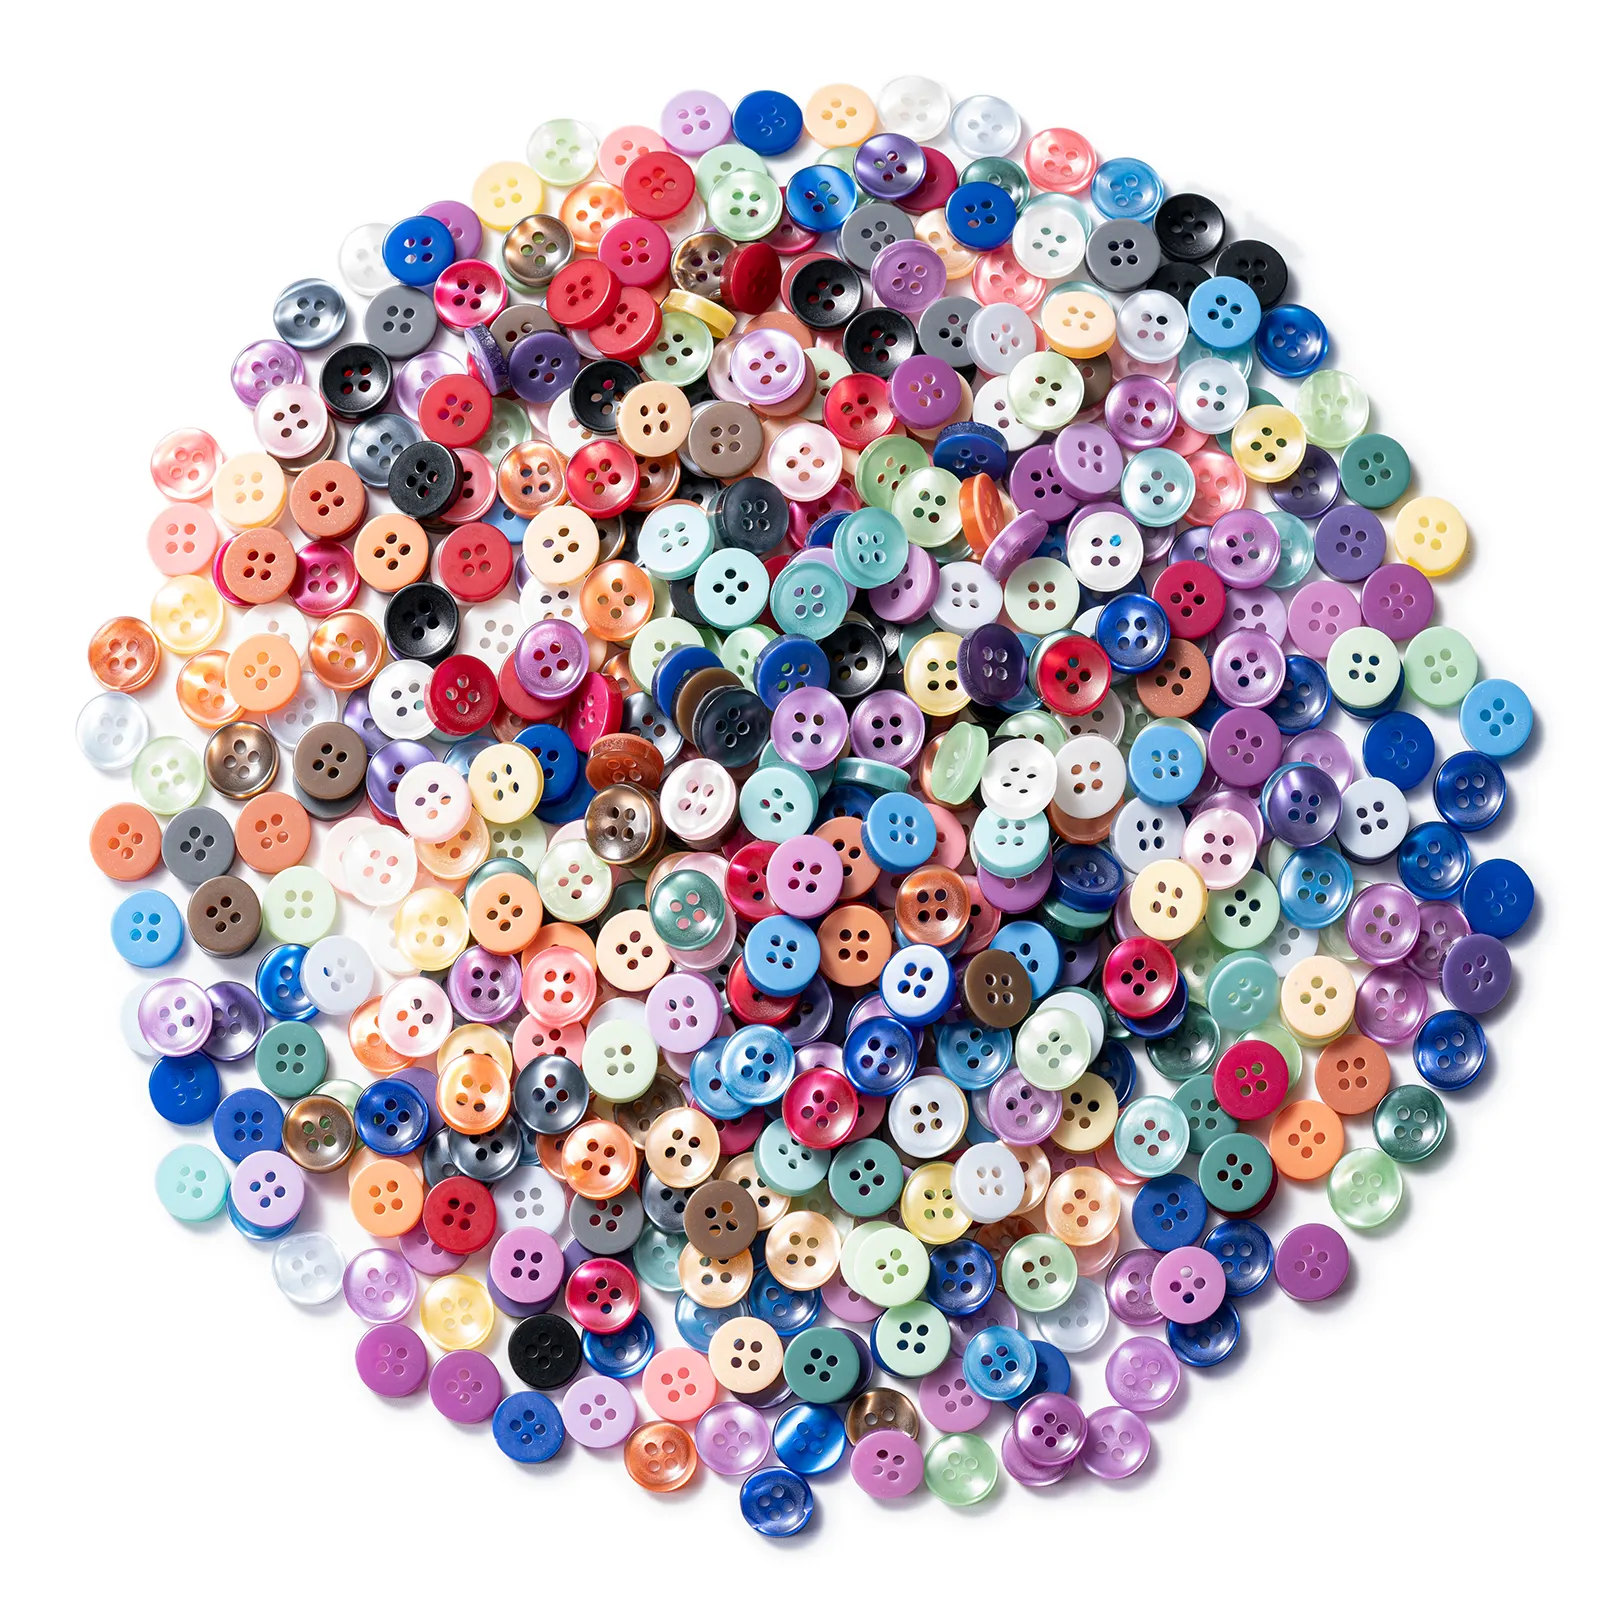 18L/11.5mm Colorful Resin Button set 24 different colors Crafting Sewing Buttons Box Handmade Craft Accessories 600pcs/set